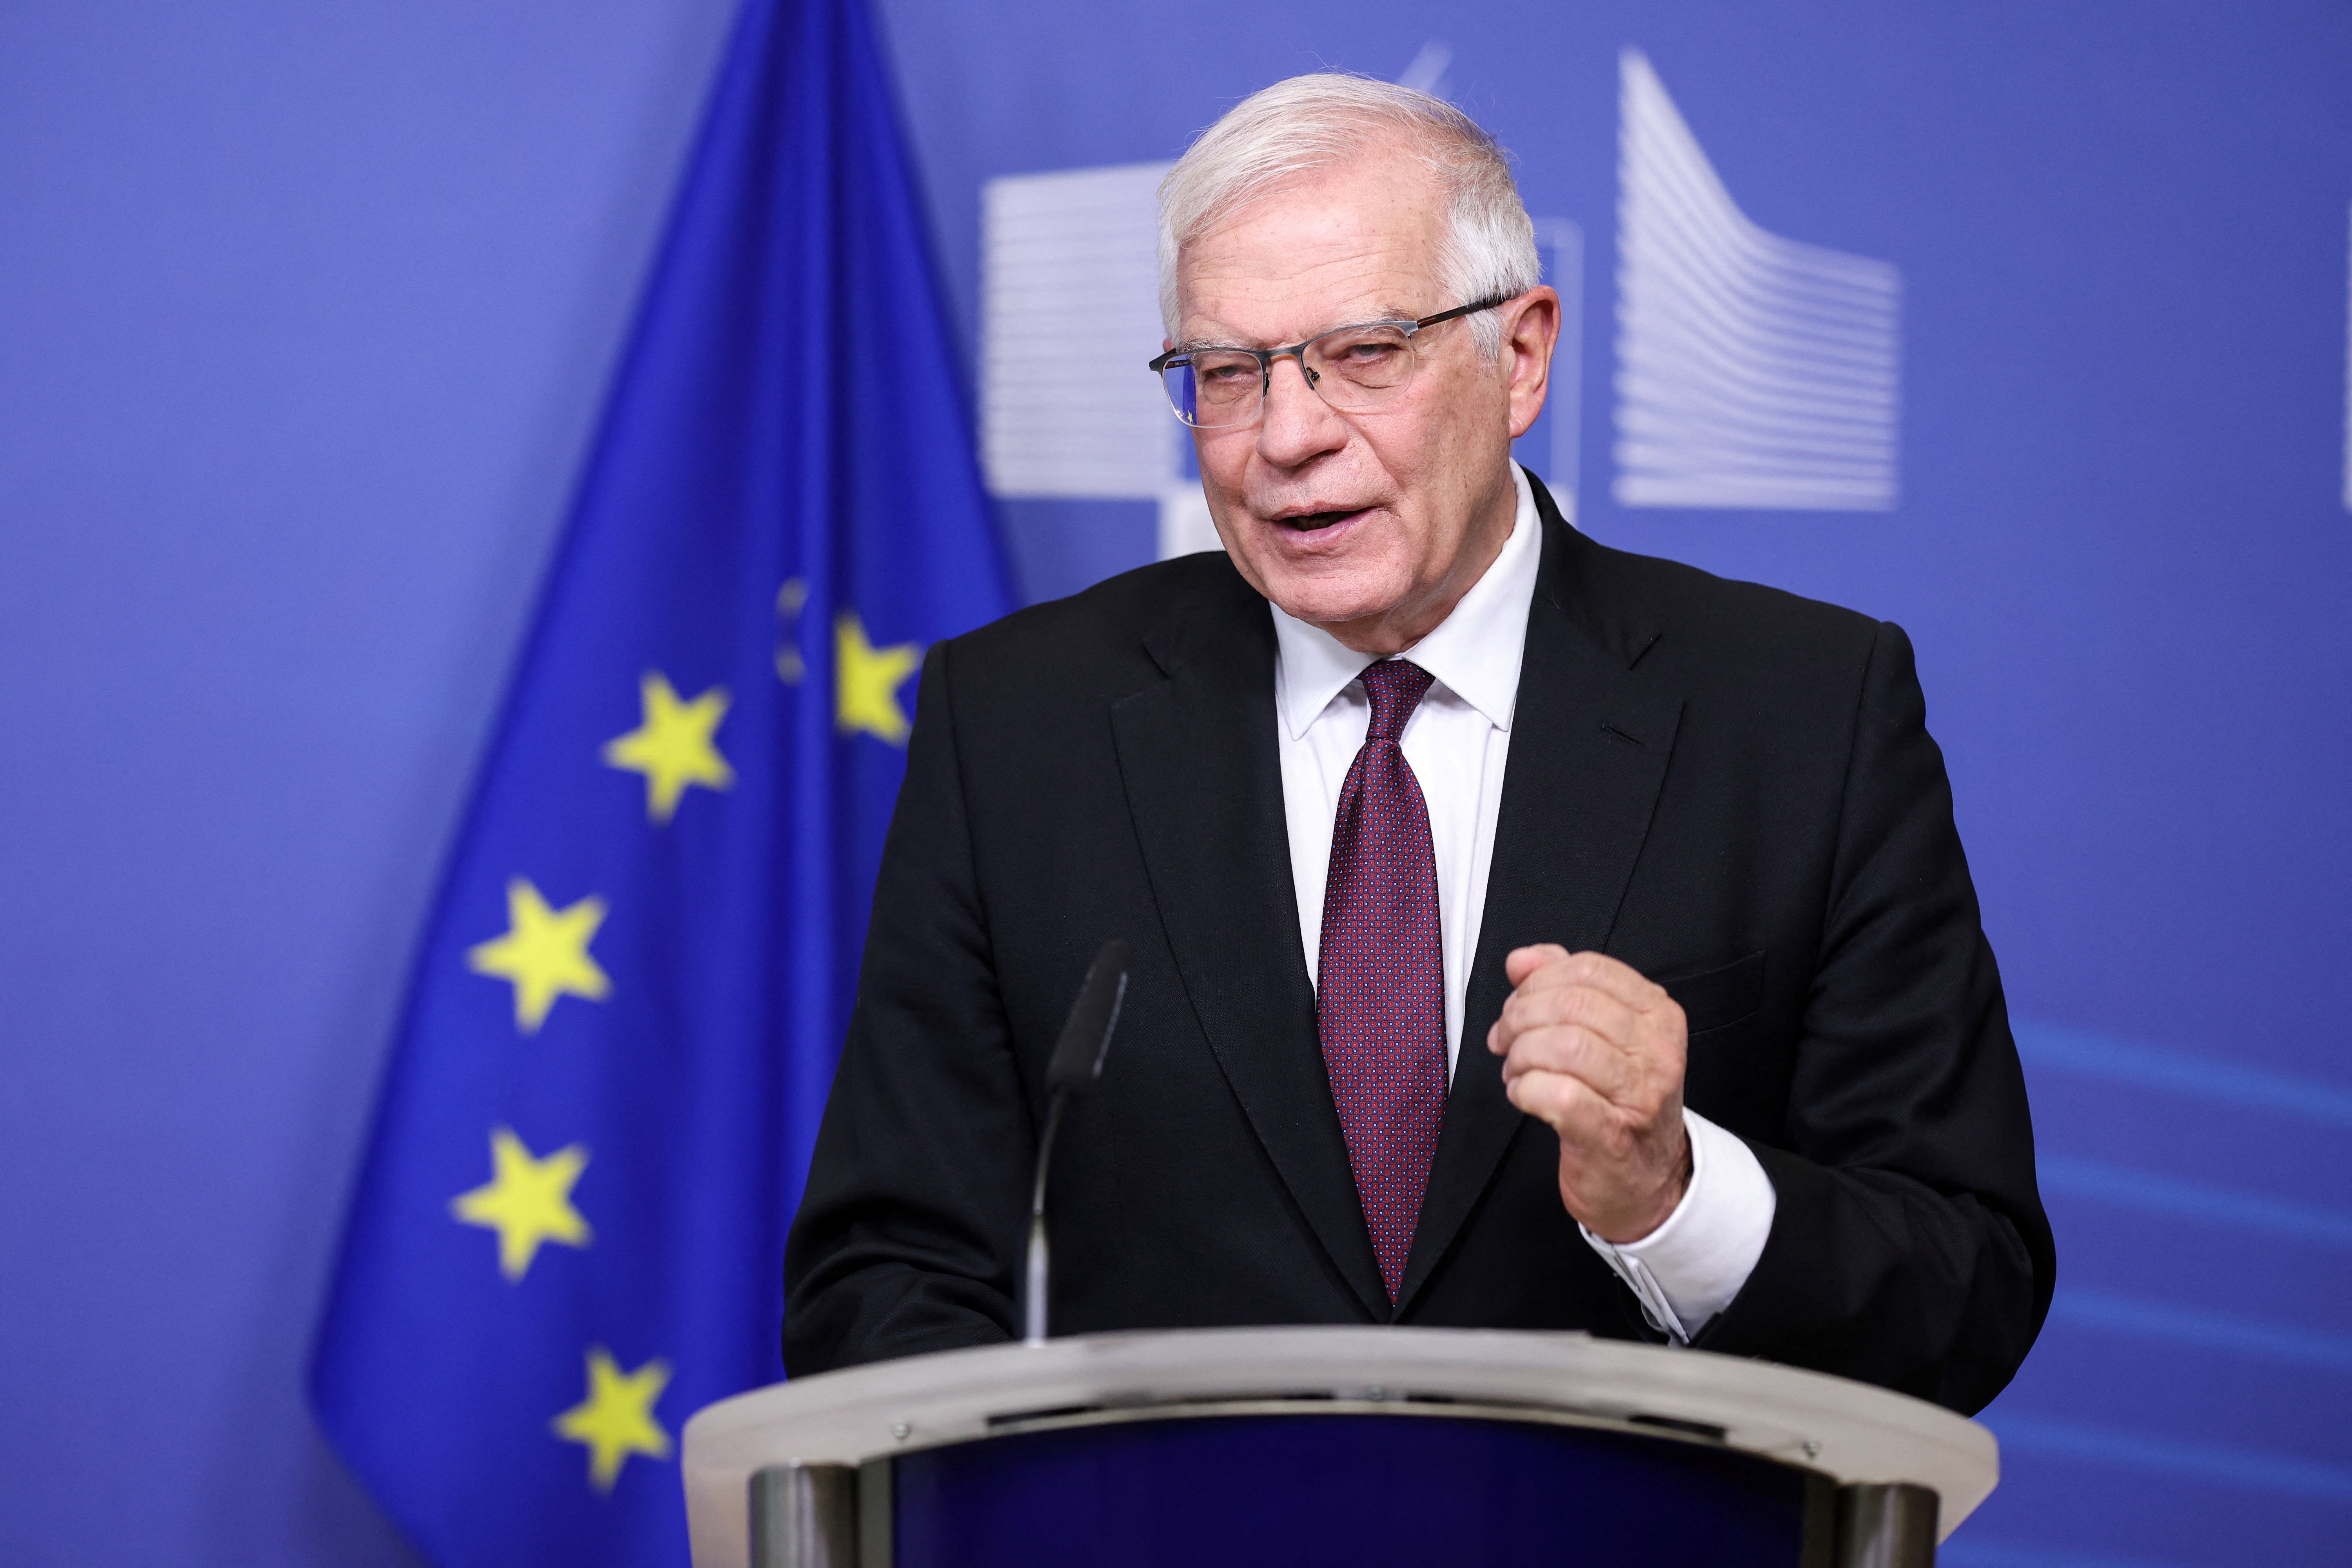 European Commission vice-president in charge of Foreign Policy Josep Borrell gives a joint press statement with the Commission President on Russia's attack on Ukraine, in Brussels, Belgium, on February 24.